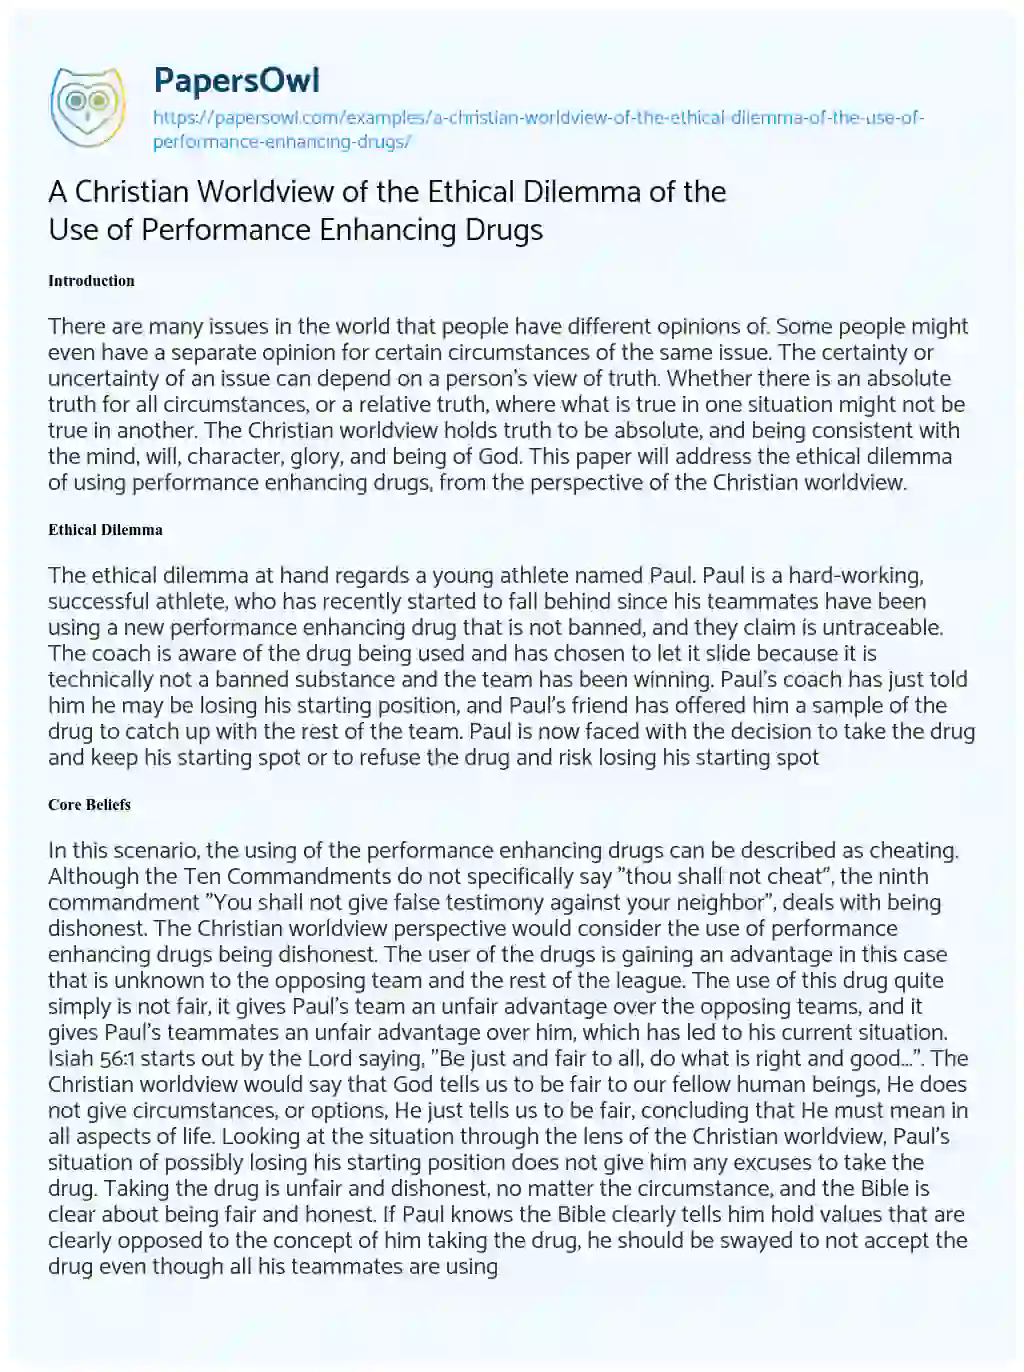 Essay on A Christian Worldview of the Ethical Dilemma of the Use of Performance Enhancing Drugs